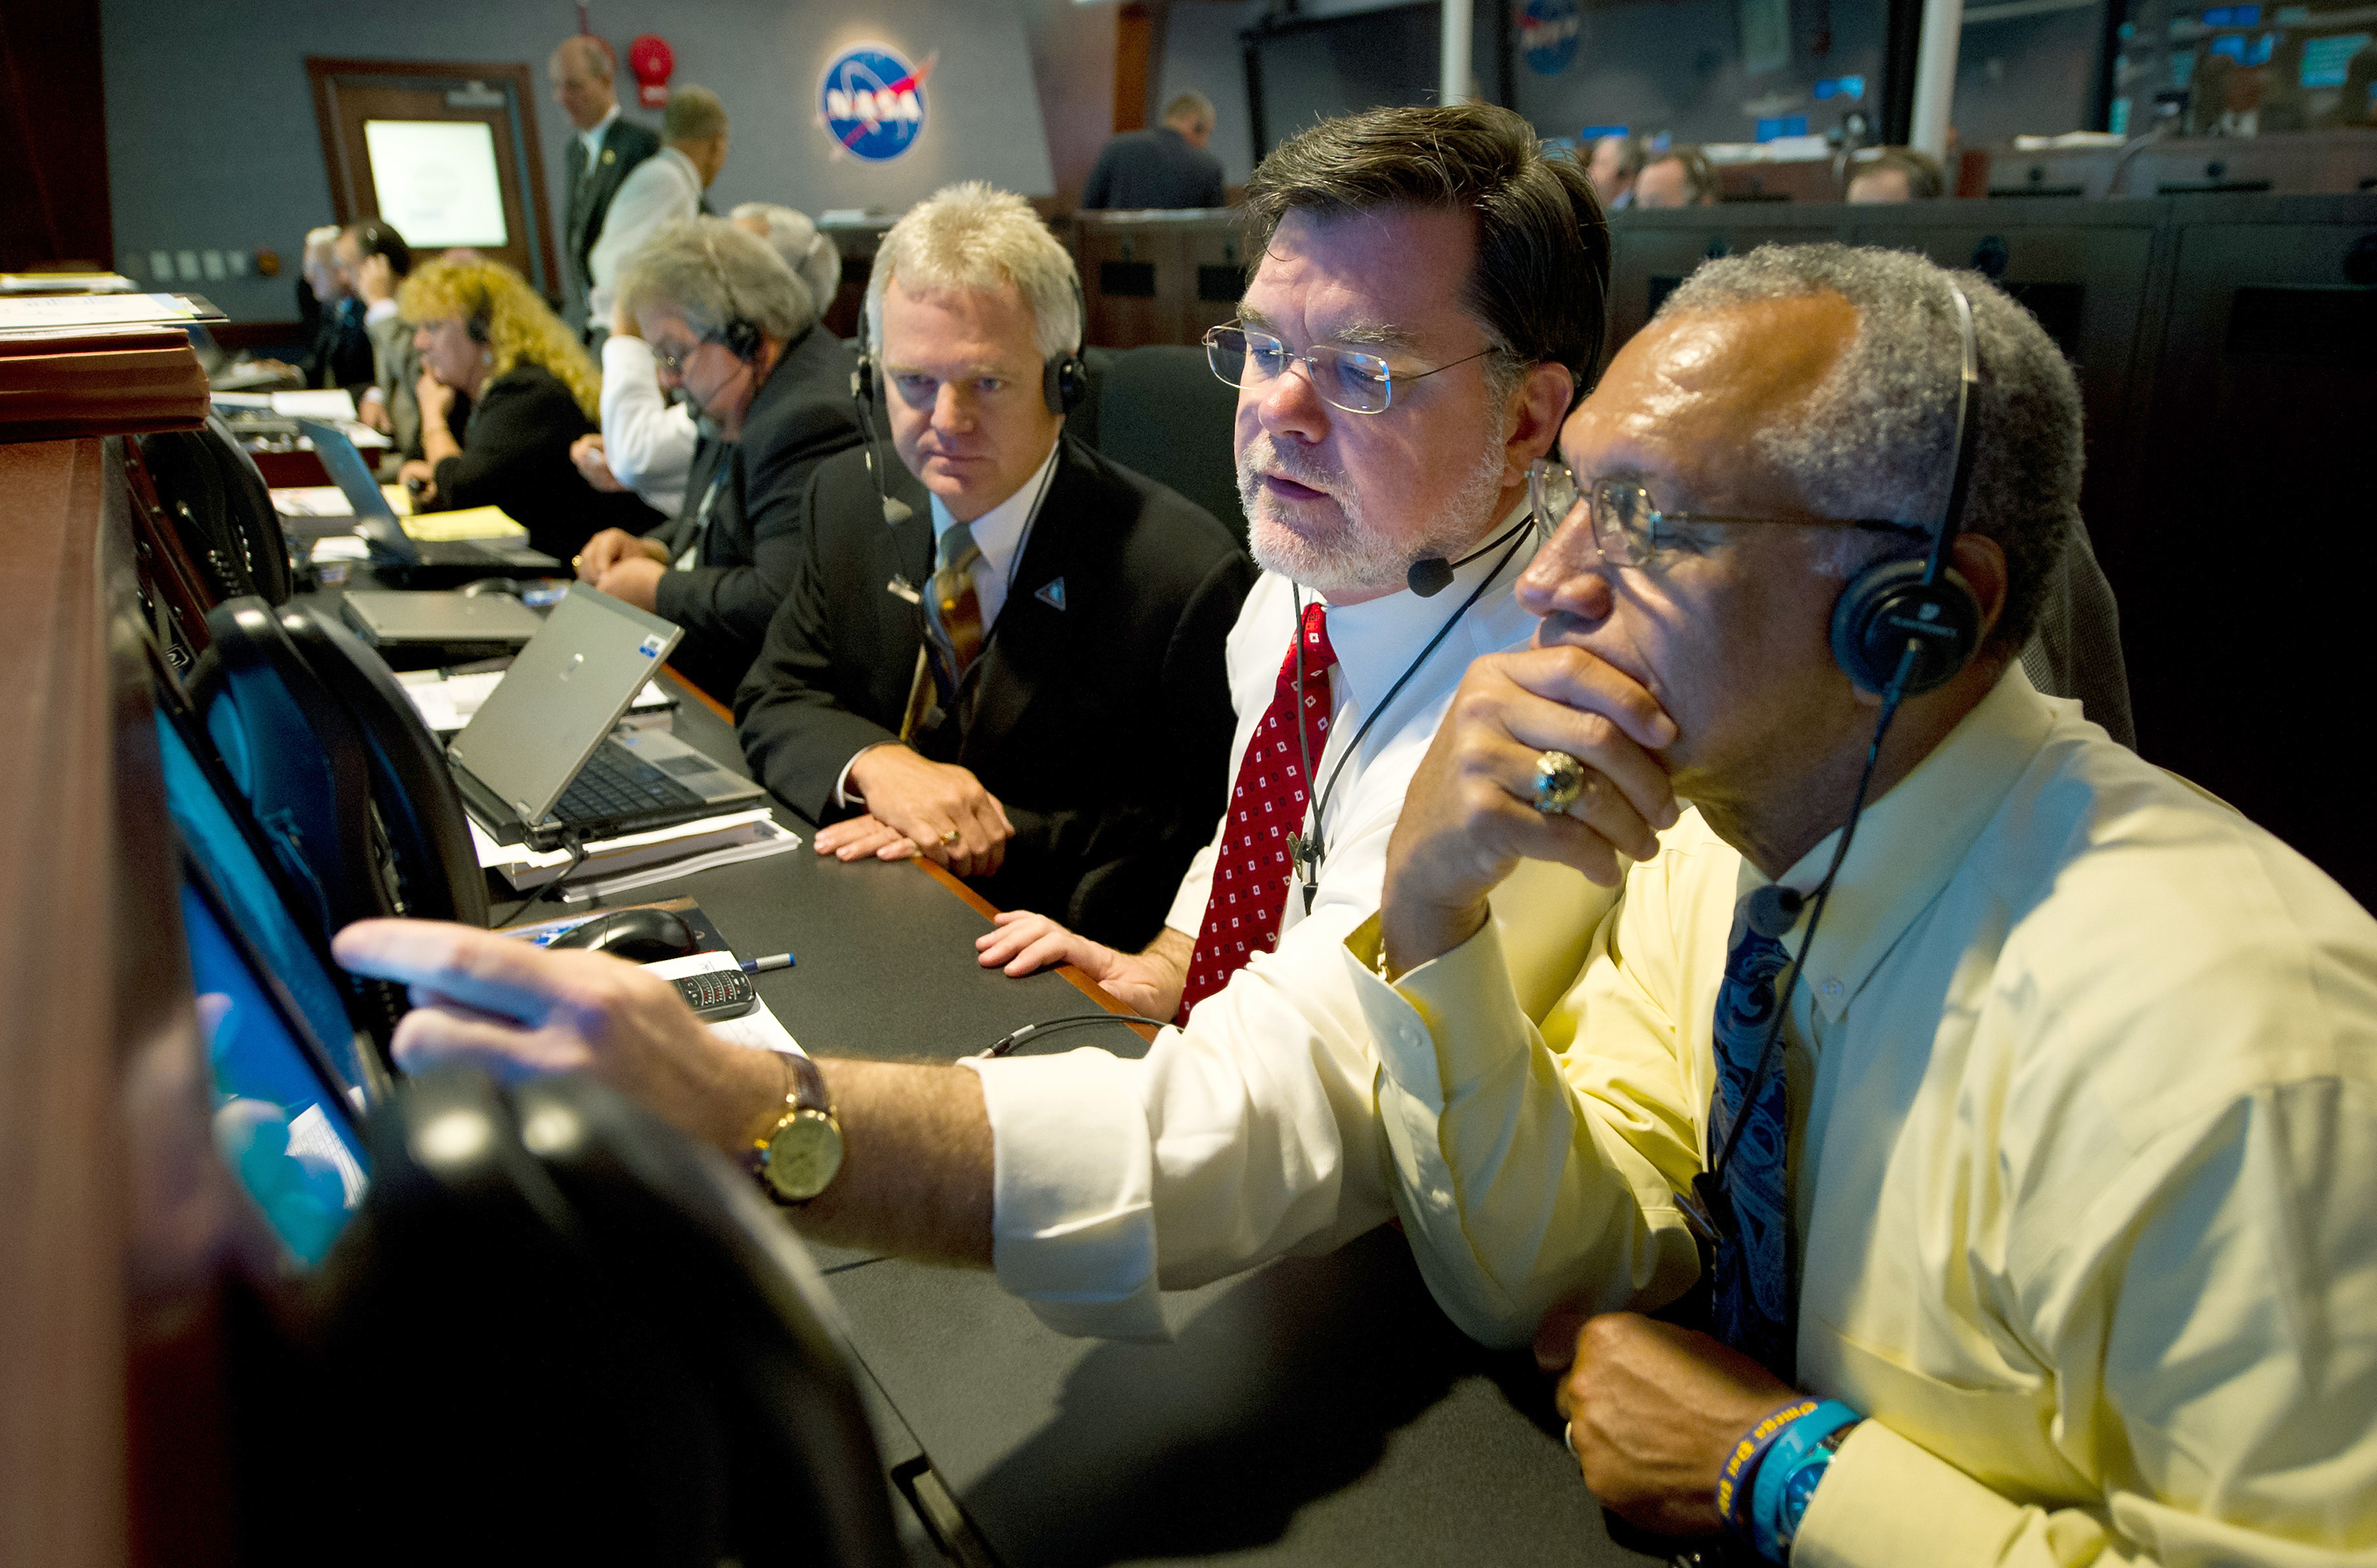 Then NASA Deputy Director of Planetary Division Jim Adams, center, and NASA Administrator Charles Bolden, right, review incoming data during the countdown to launch of the twin GRAIL spacecraft in 2011 at the Cape Canaveral Air Force Station. Credit: NASA/Bill Ingalls